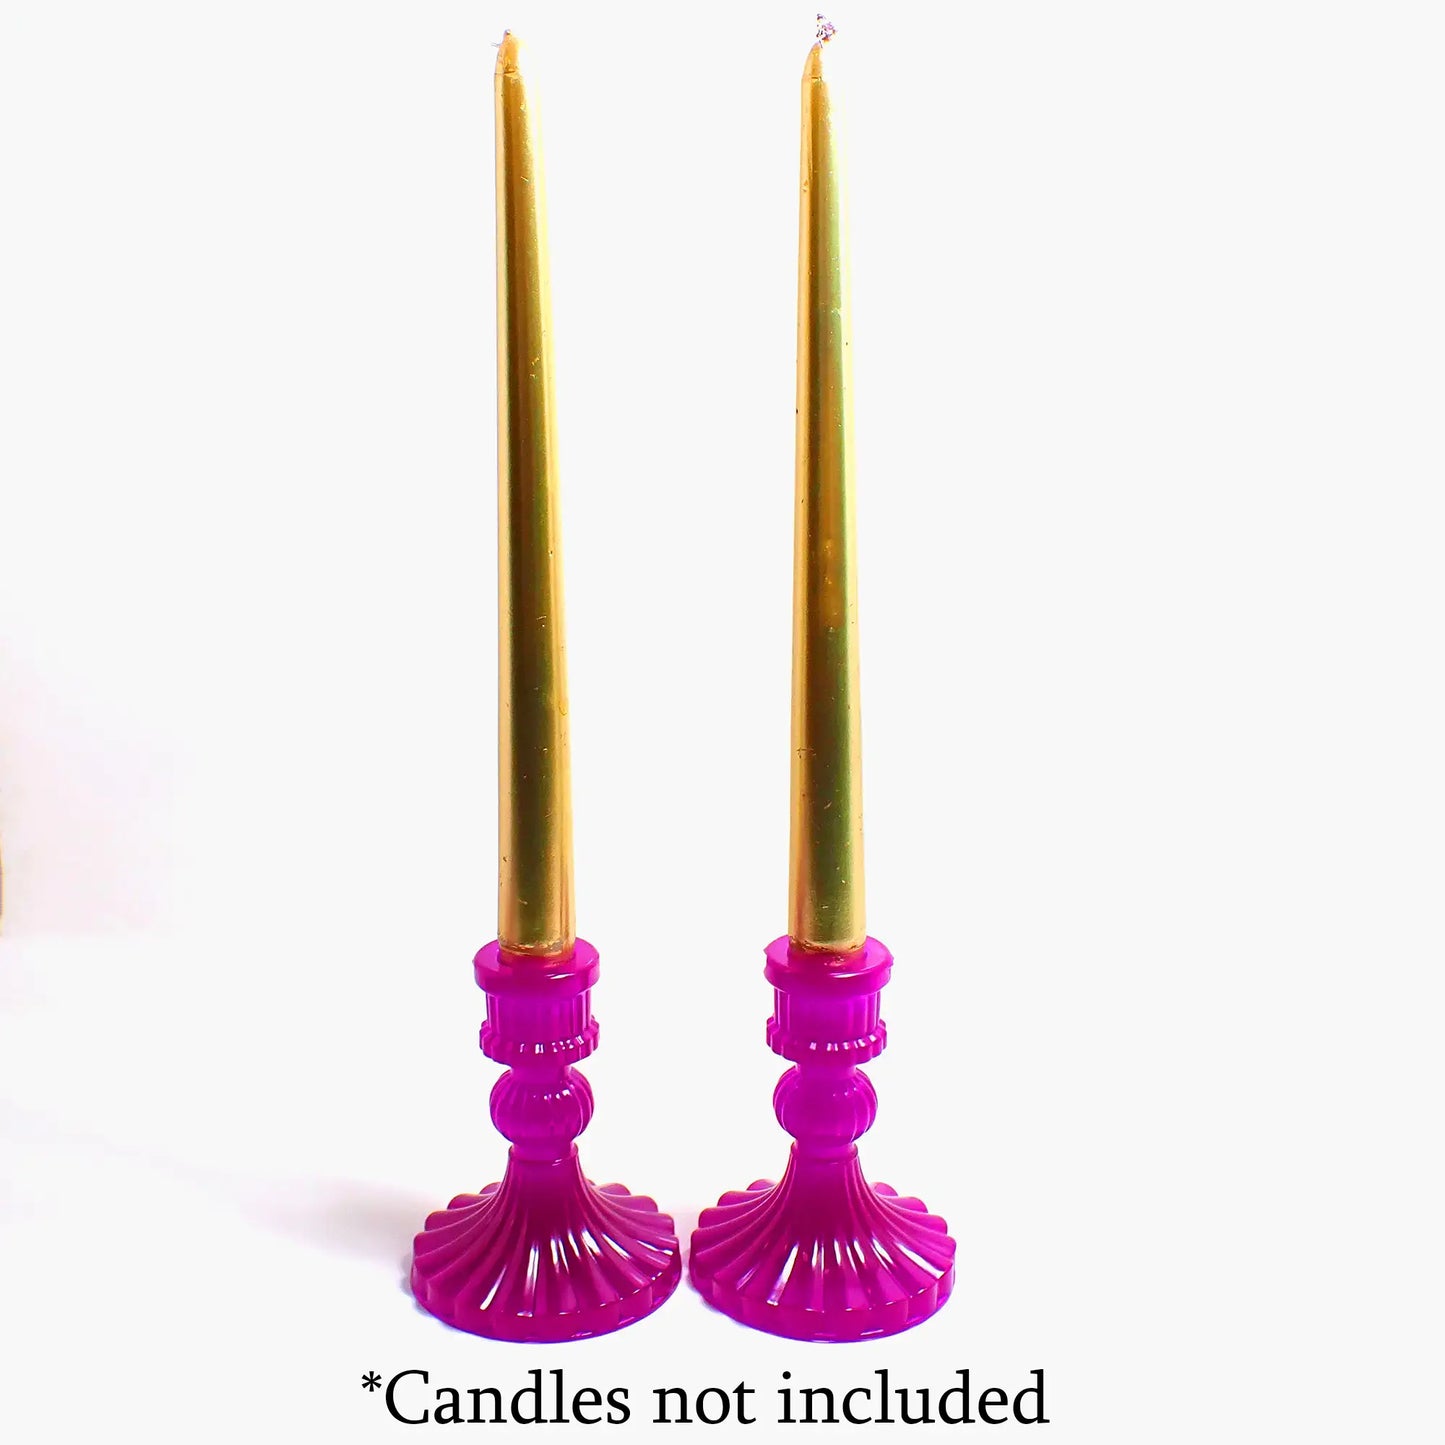 Set of Two Vintage Style Handmade Neon Purple Resin Candlestick Holders